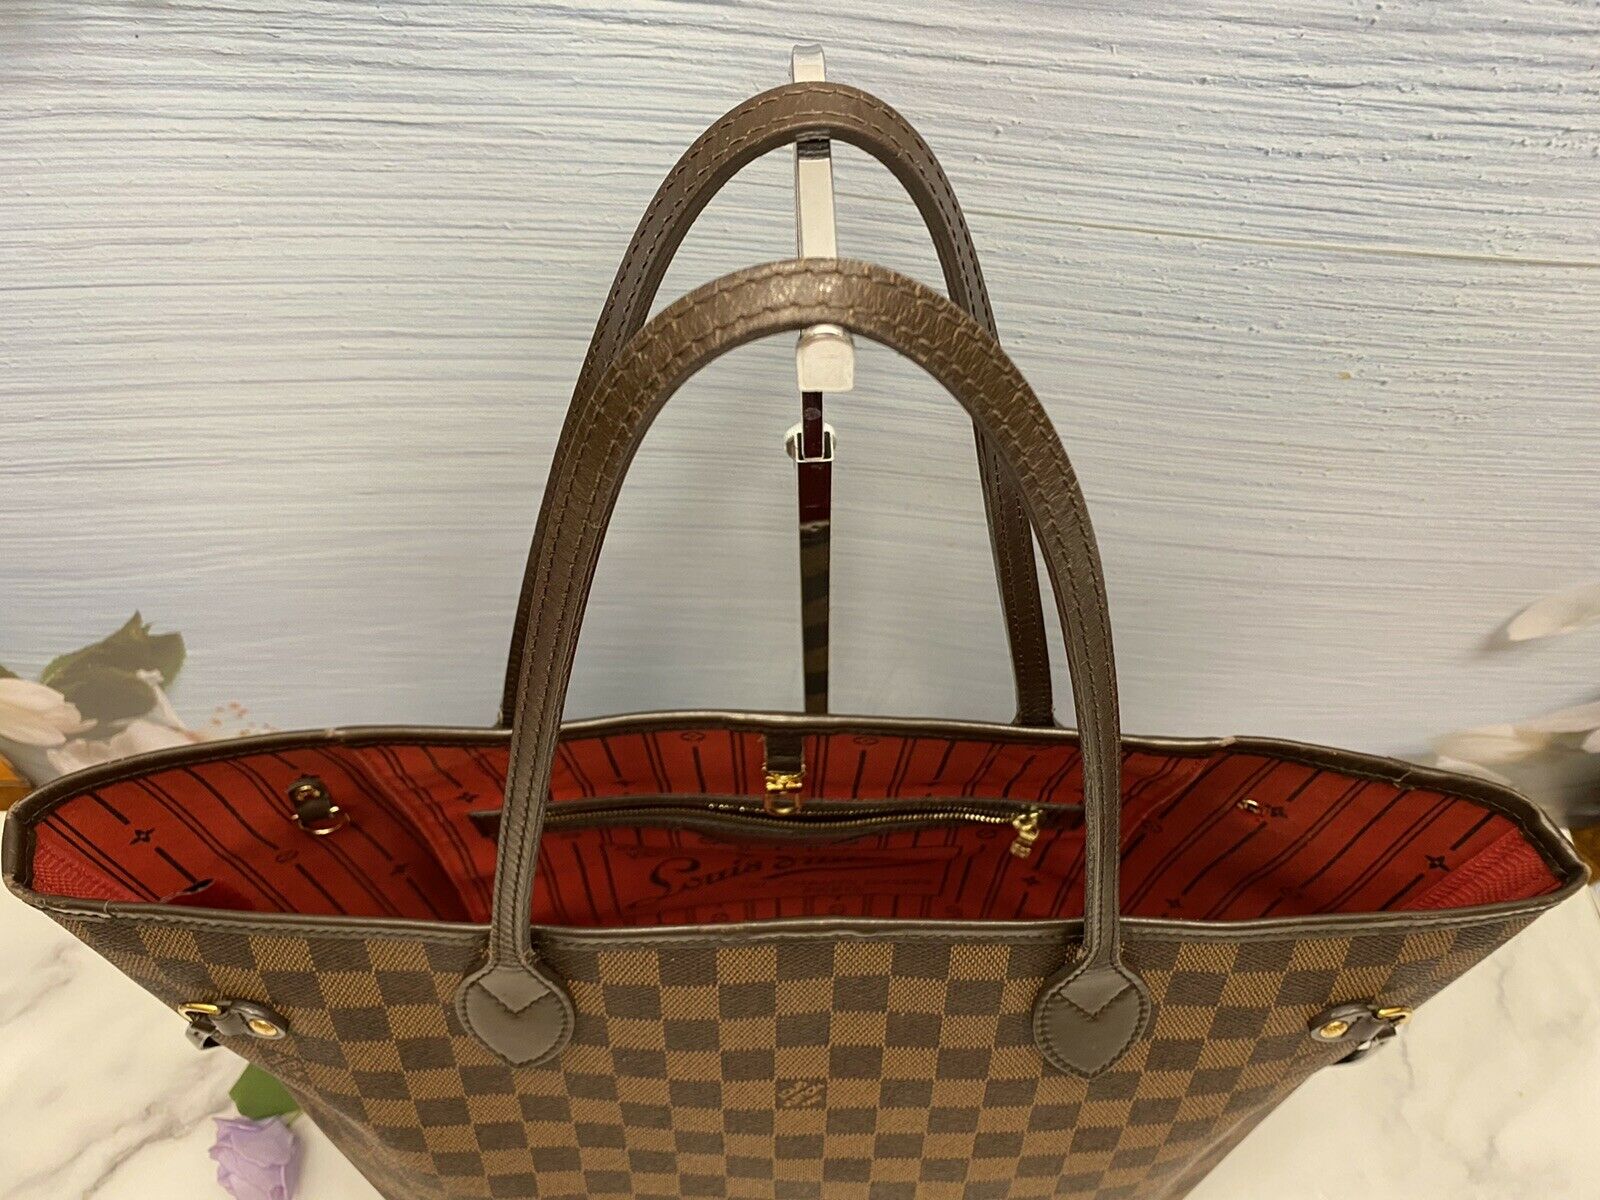 🌸Louis Vuitton Neverfull MM Damier Ebene Cherry Red Tote Shoulder